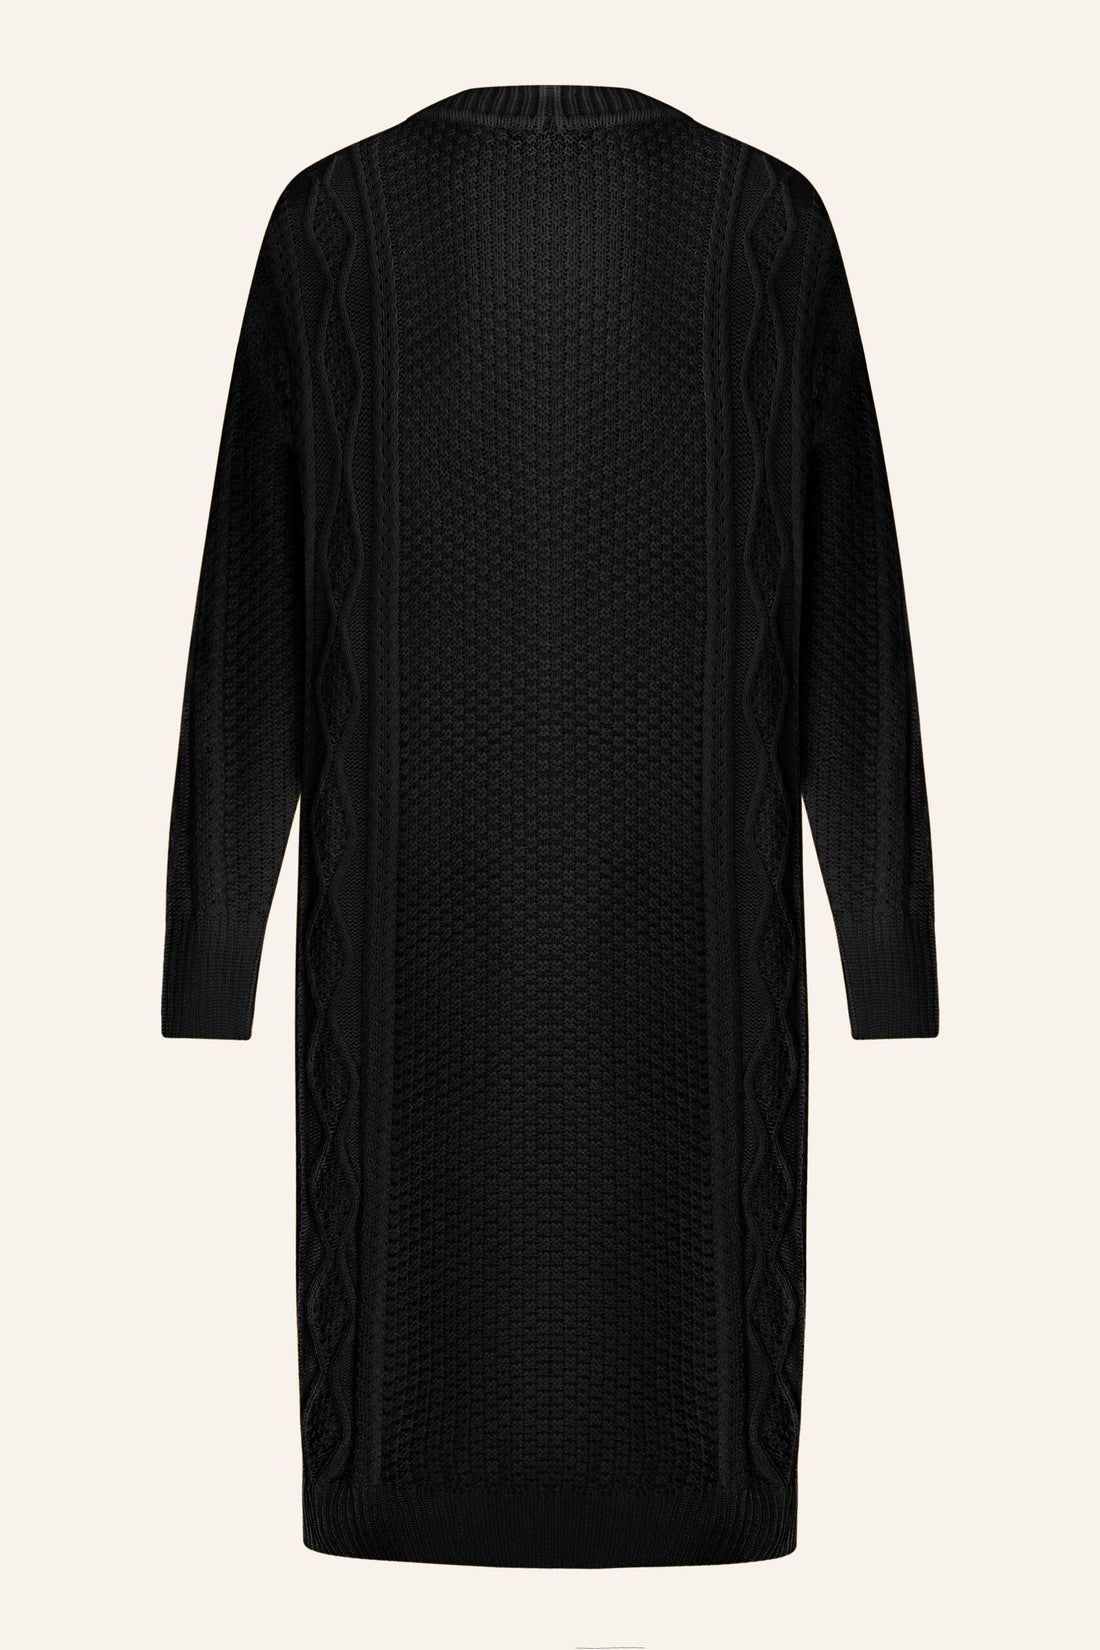 Knitted cardigan, black, (T.Mosca), GKMR23-02